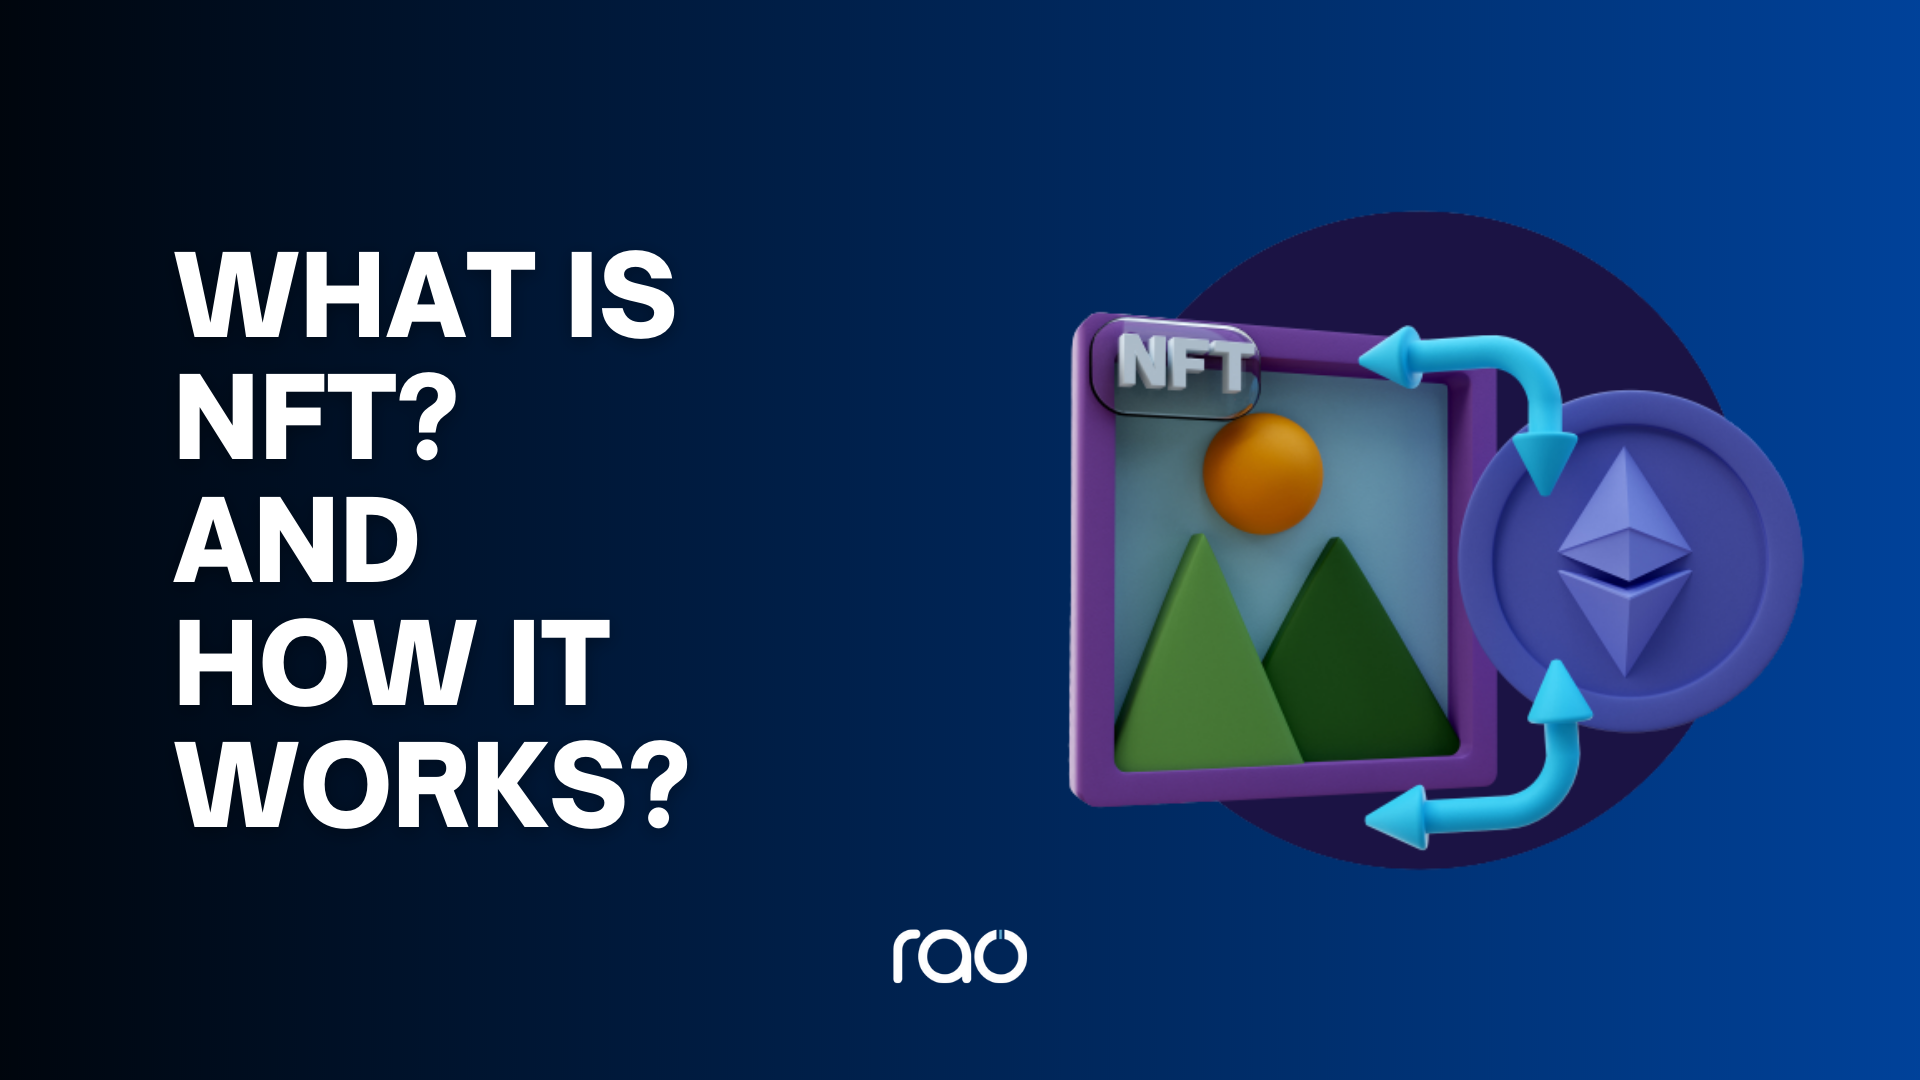 What is NFT and how it works?